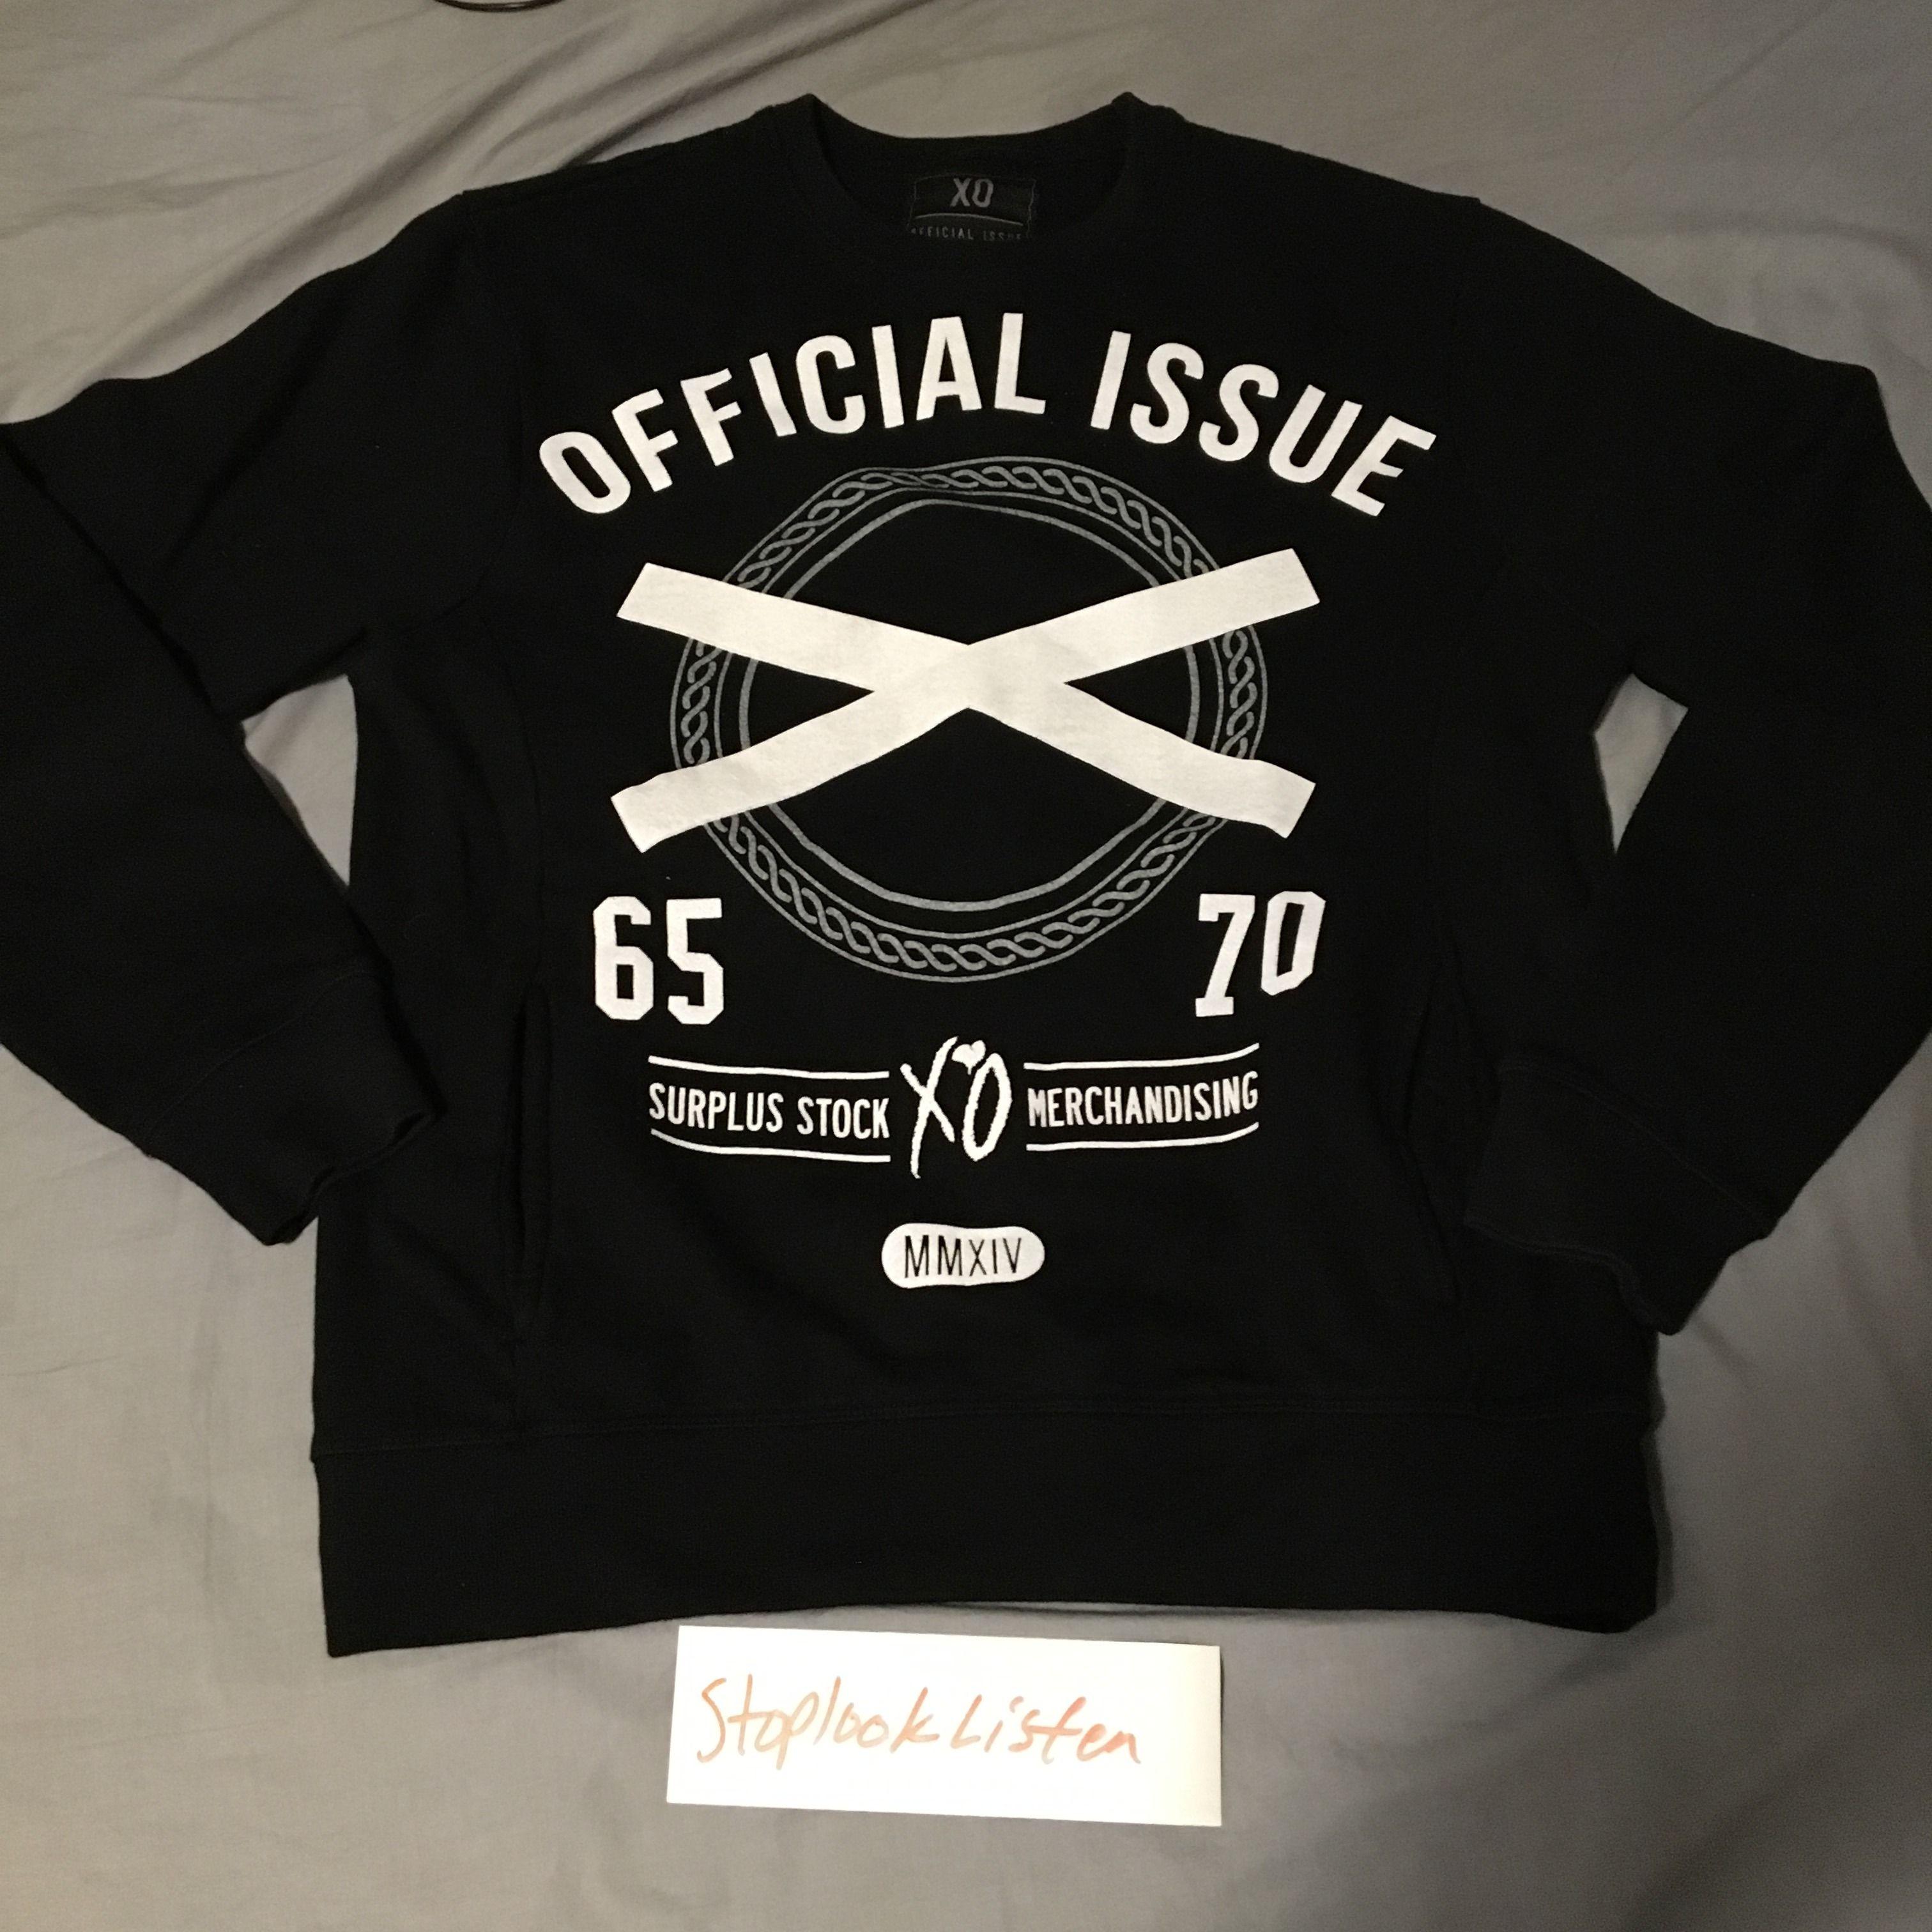 Official Issue Xo Logo - THE WEEKND OFFICIAL ISSUE XO RARE CREWNECK SWEATER SIZE L LARGE ...